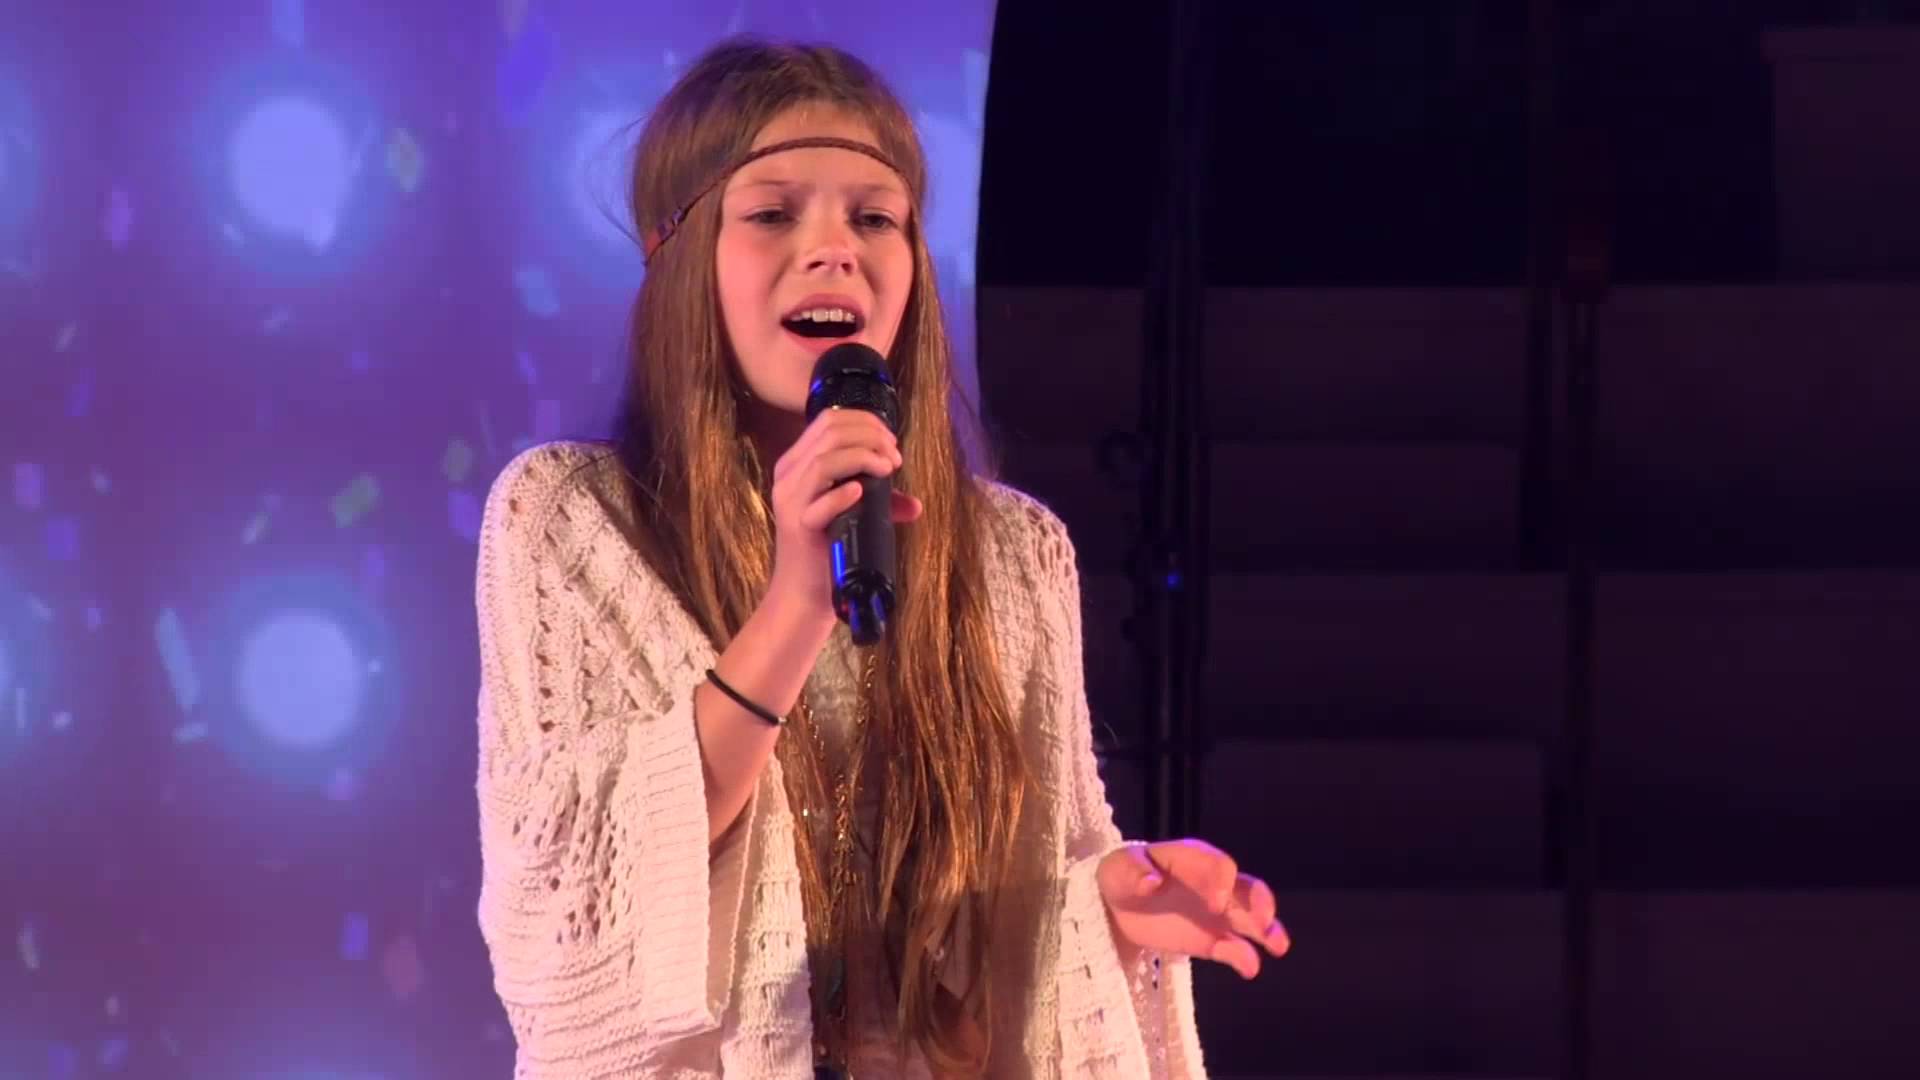 "America's Got Talent" 13YearOld Contestant Turns Into A Rock Star